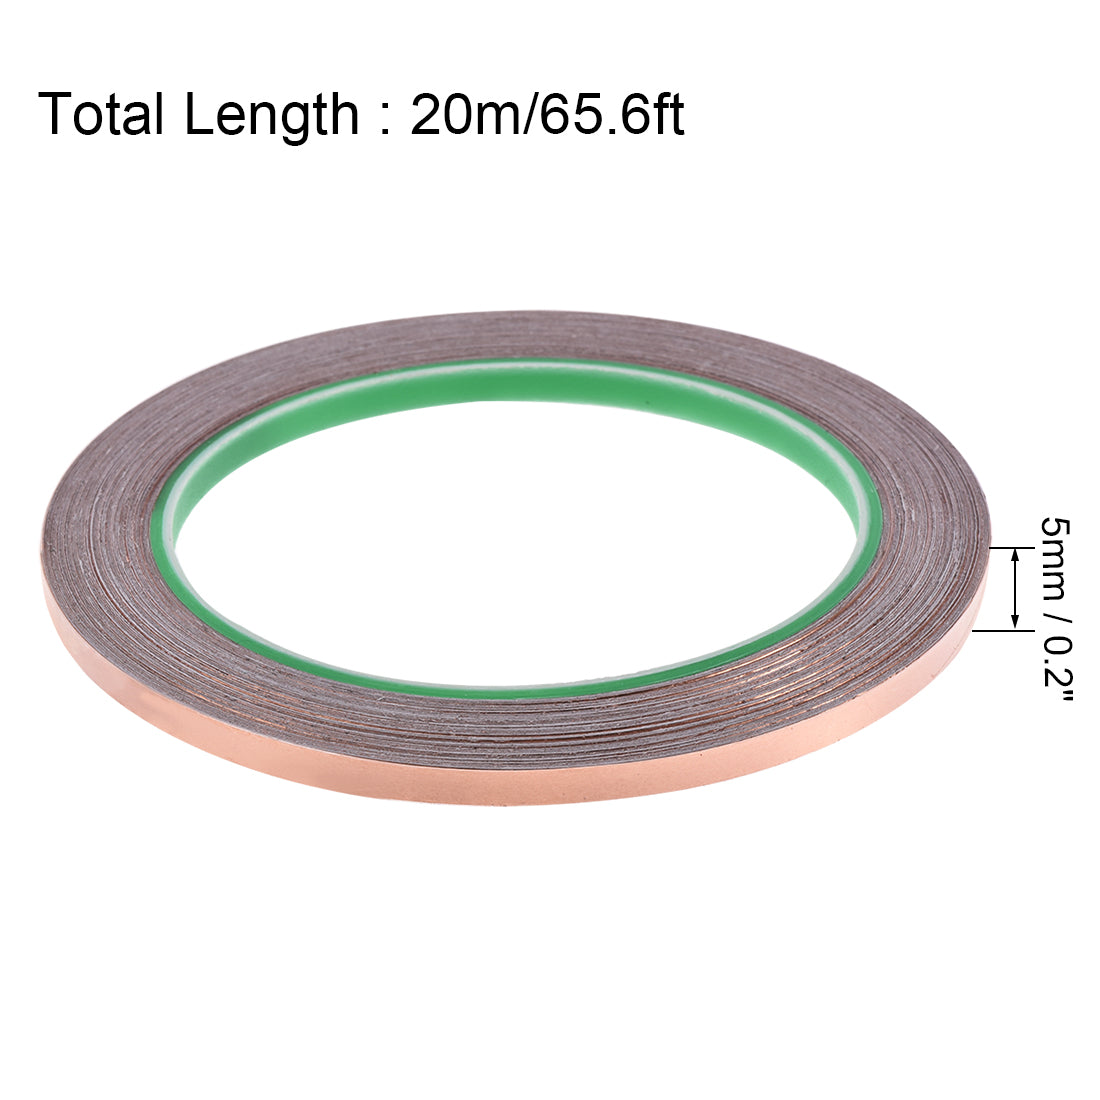 uxcell Uxcell Double Sided Conductive Tape Copper Foil Tape 5mm x 20m for EMI Shielding 2 Roll